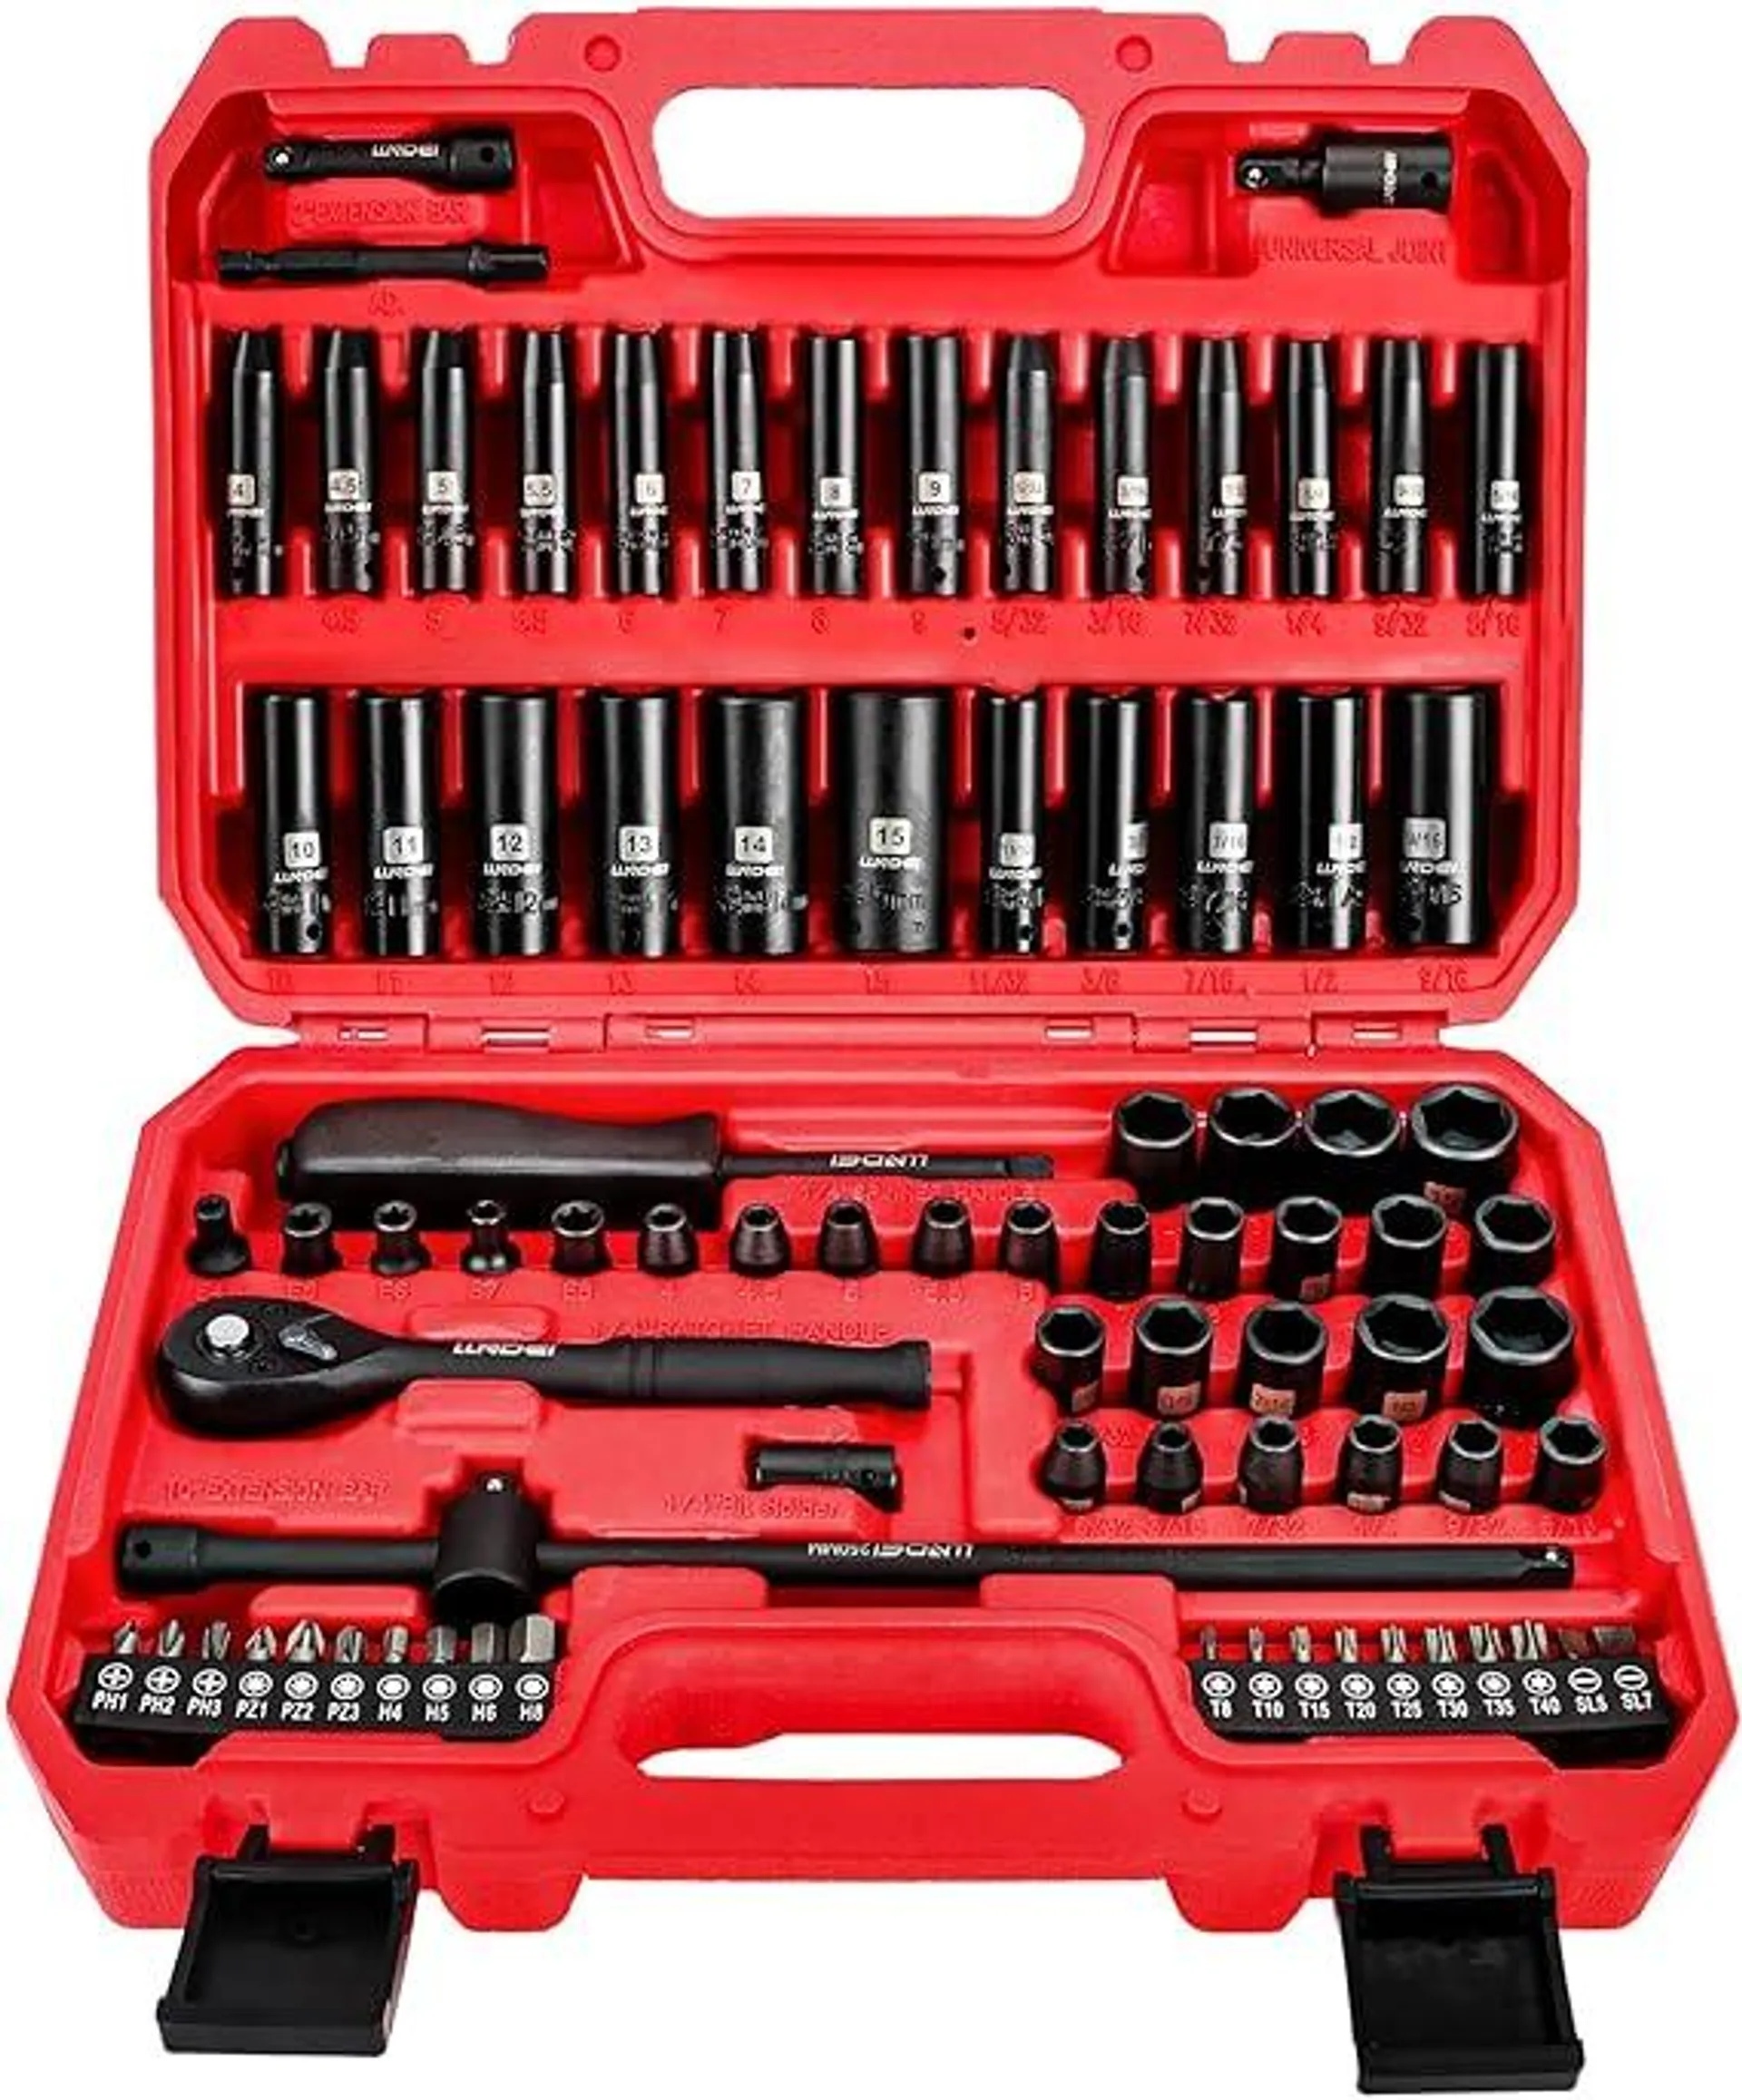 LLNDEI 1/4 inch Drive Impact Socket Set 83 Piece,Standard SAE(5/32-9/16 inch) Metric Size(4-15mm),72T Ratchet Wrench Handle,CR-V Mechanics Tool Set with Adapter,Screwdriver Bits for Automotive Repair